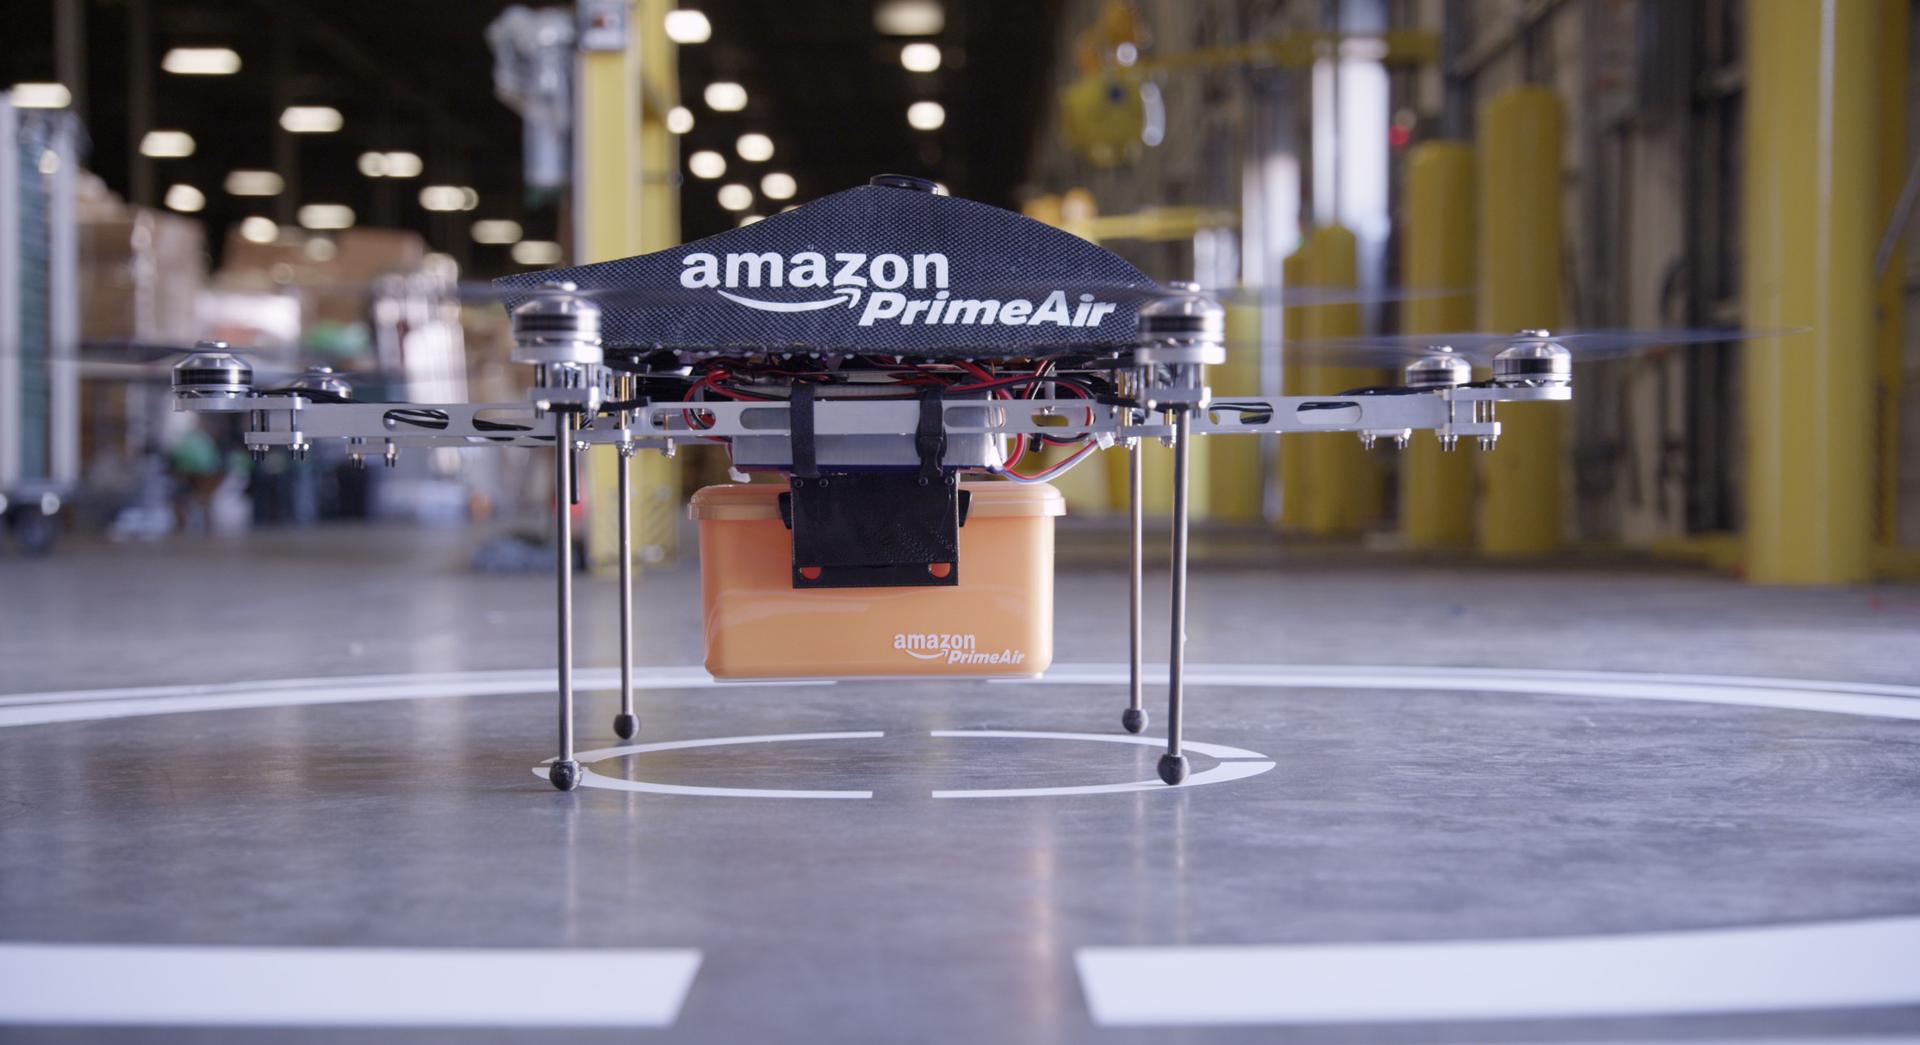 Amazon's drone delivery program, known as Amazon Prime Air, will be doing its testing in Canada because of tight FAA airspace rules.